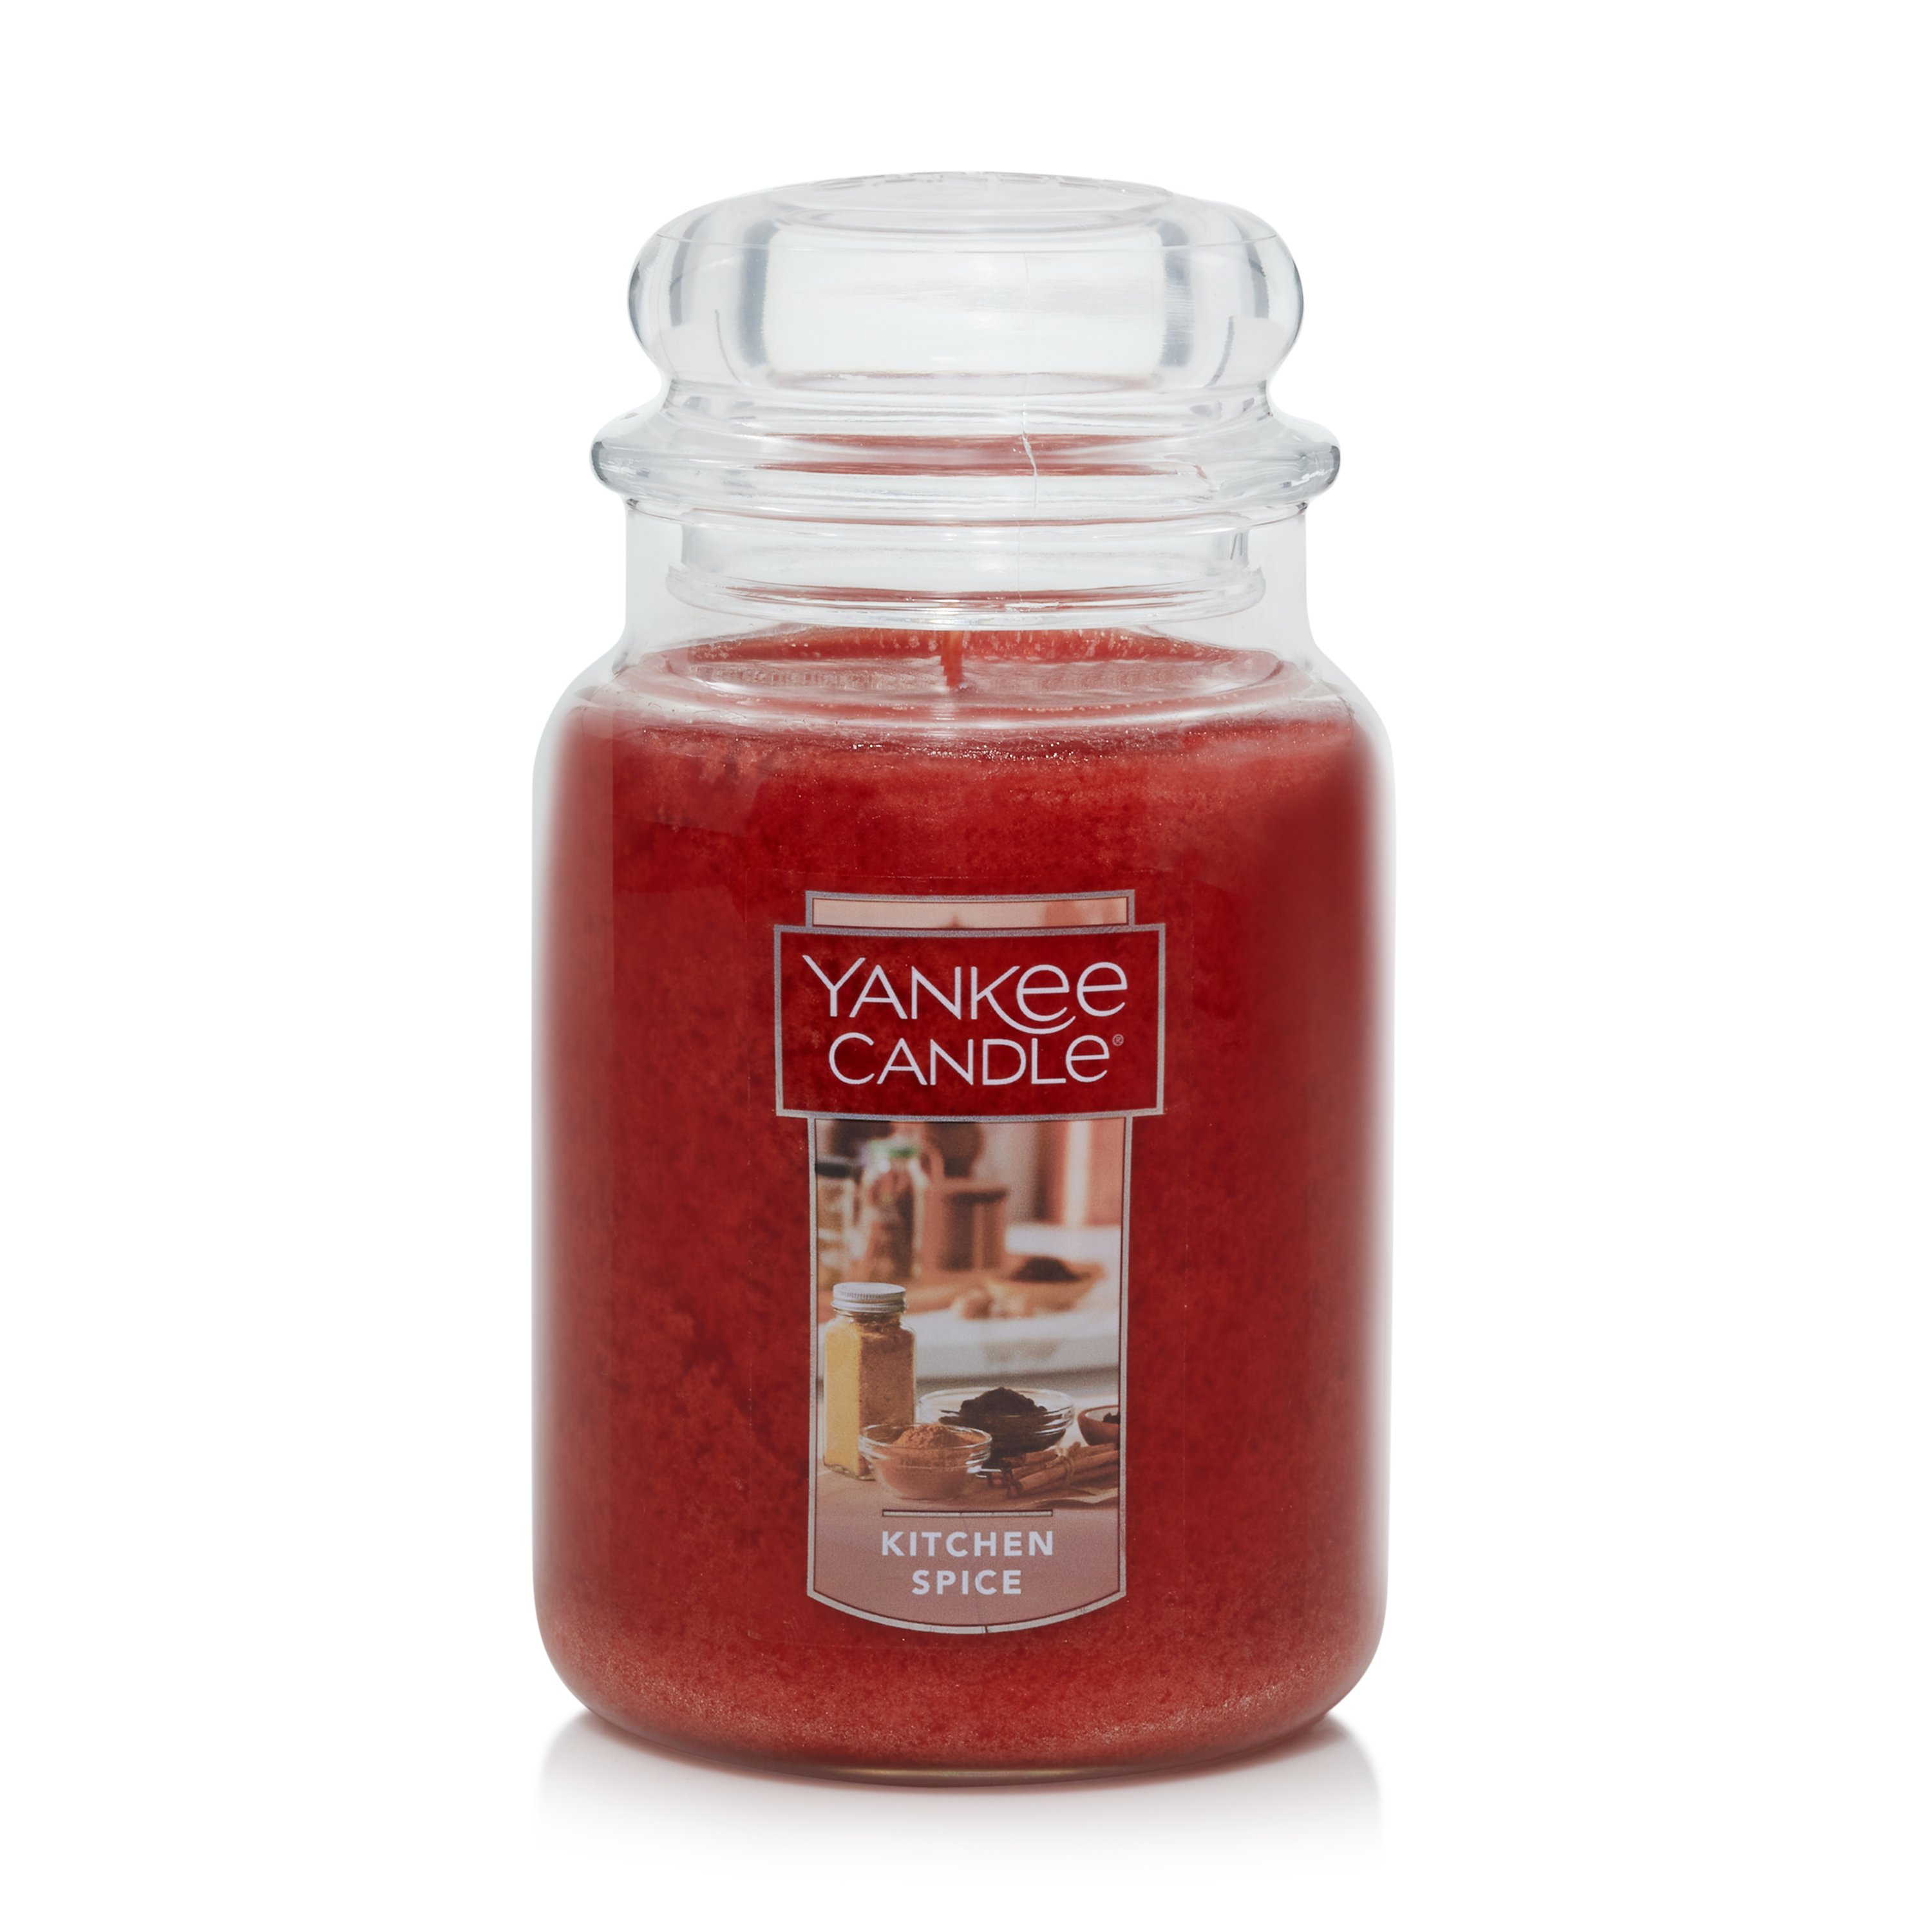 Yankee Candle, Accents, 4 For 5 Yankee Candle Wax Melts